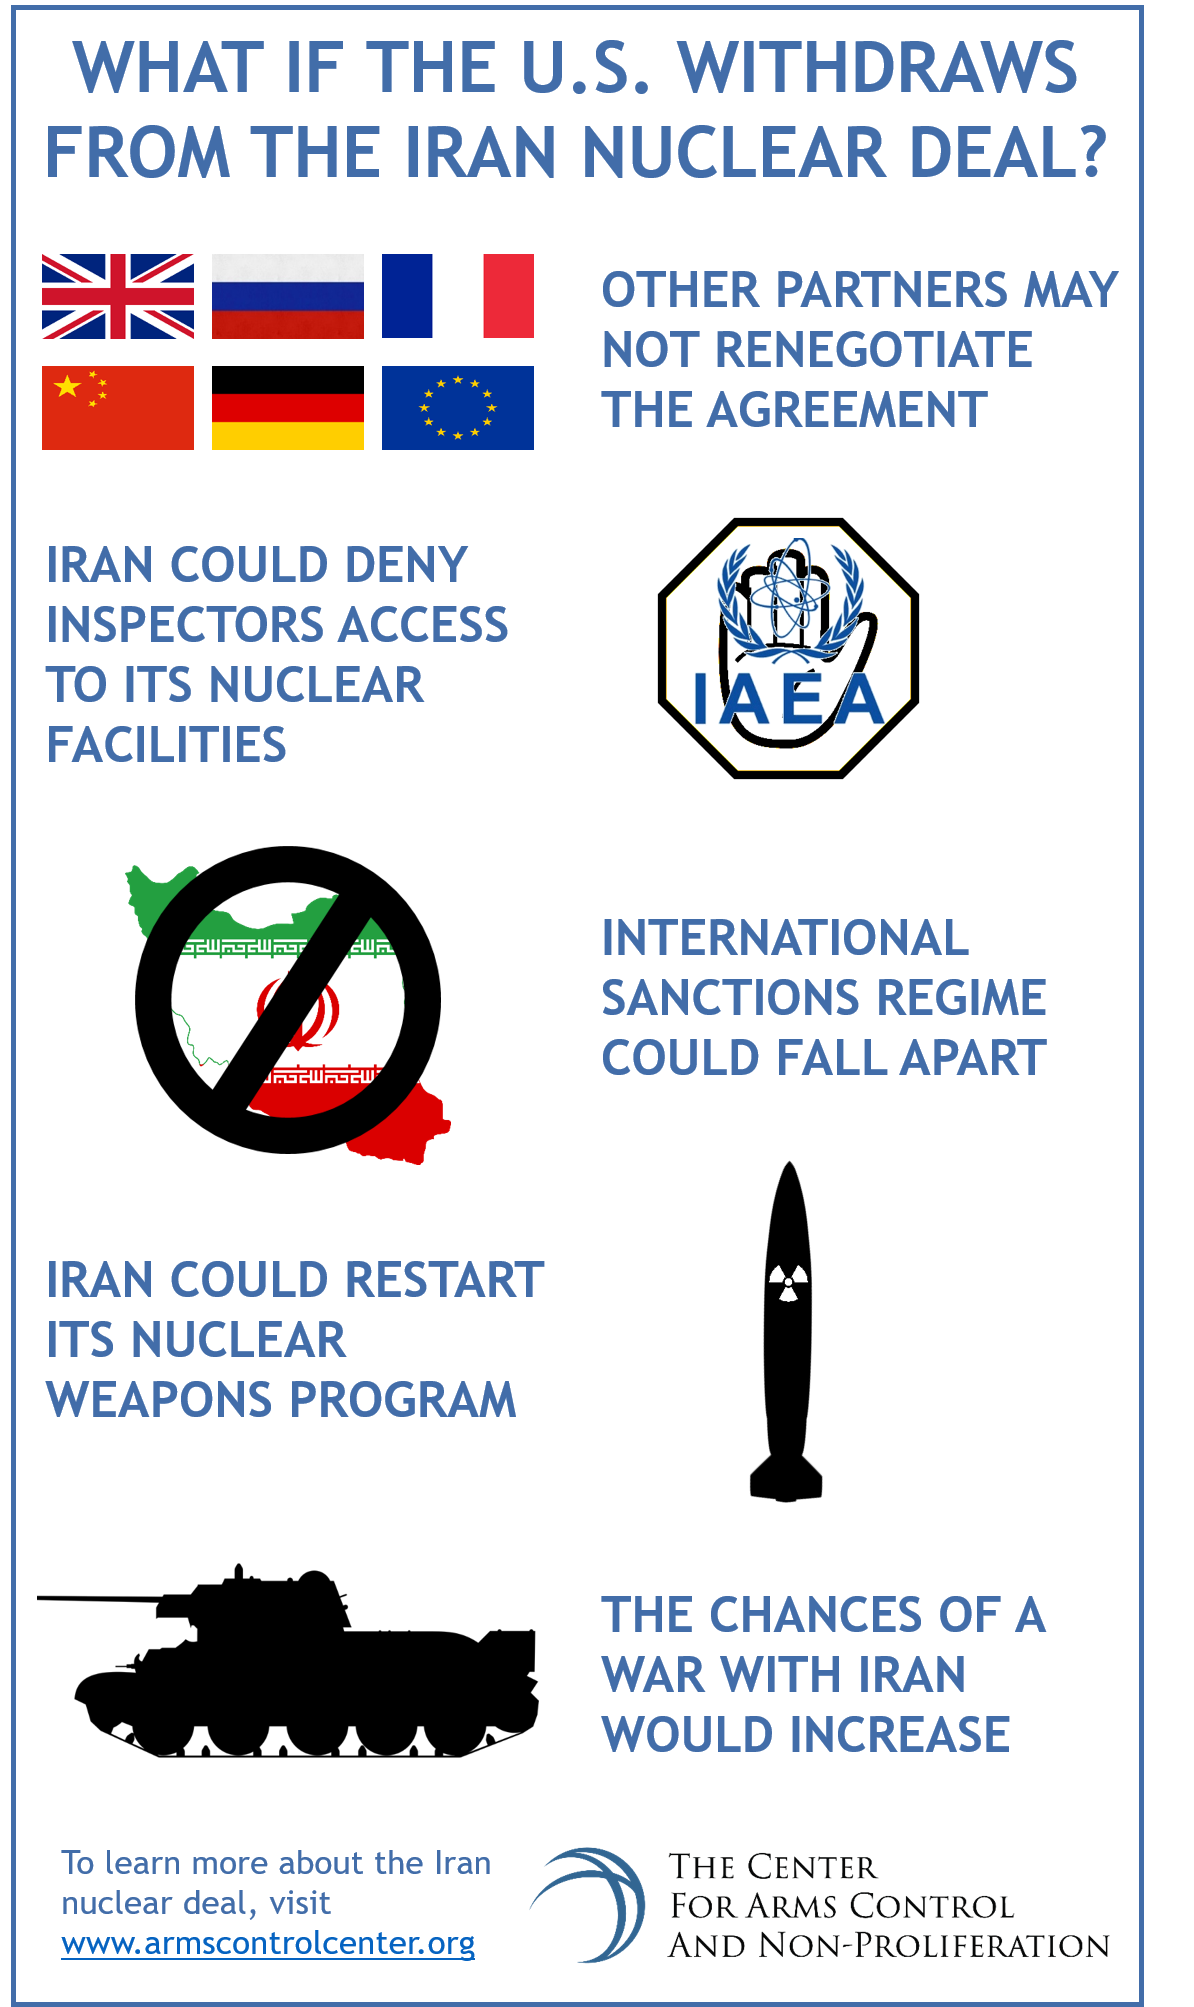 Infographic explaining potential consequences of the U.S. withdrawing from the Iran Nuclear Deal.